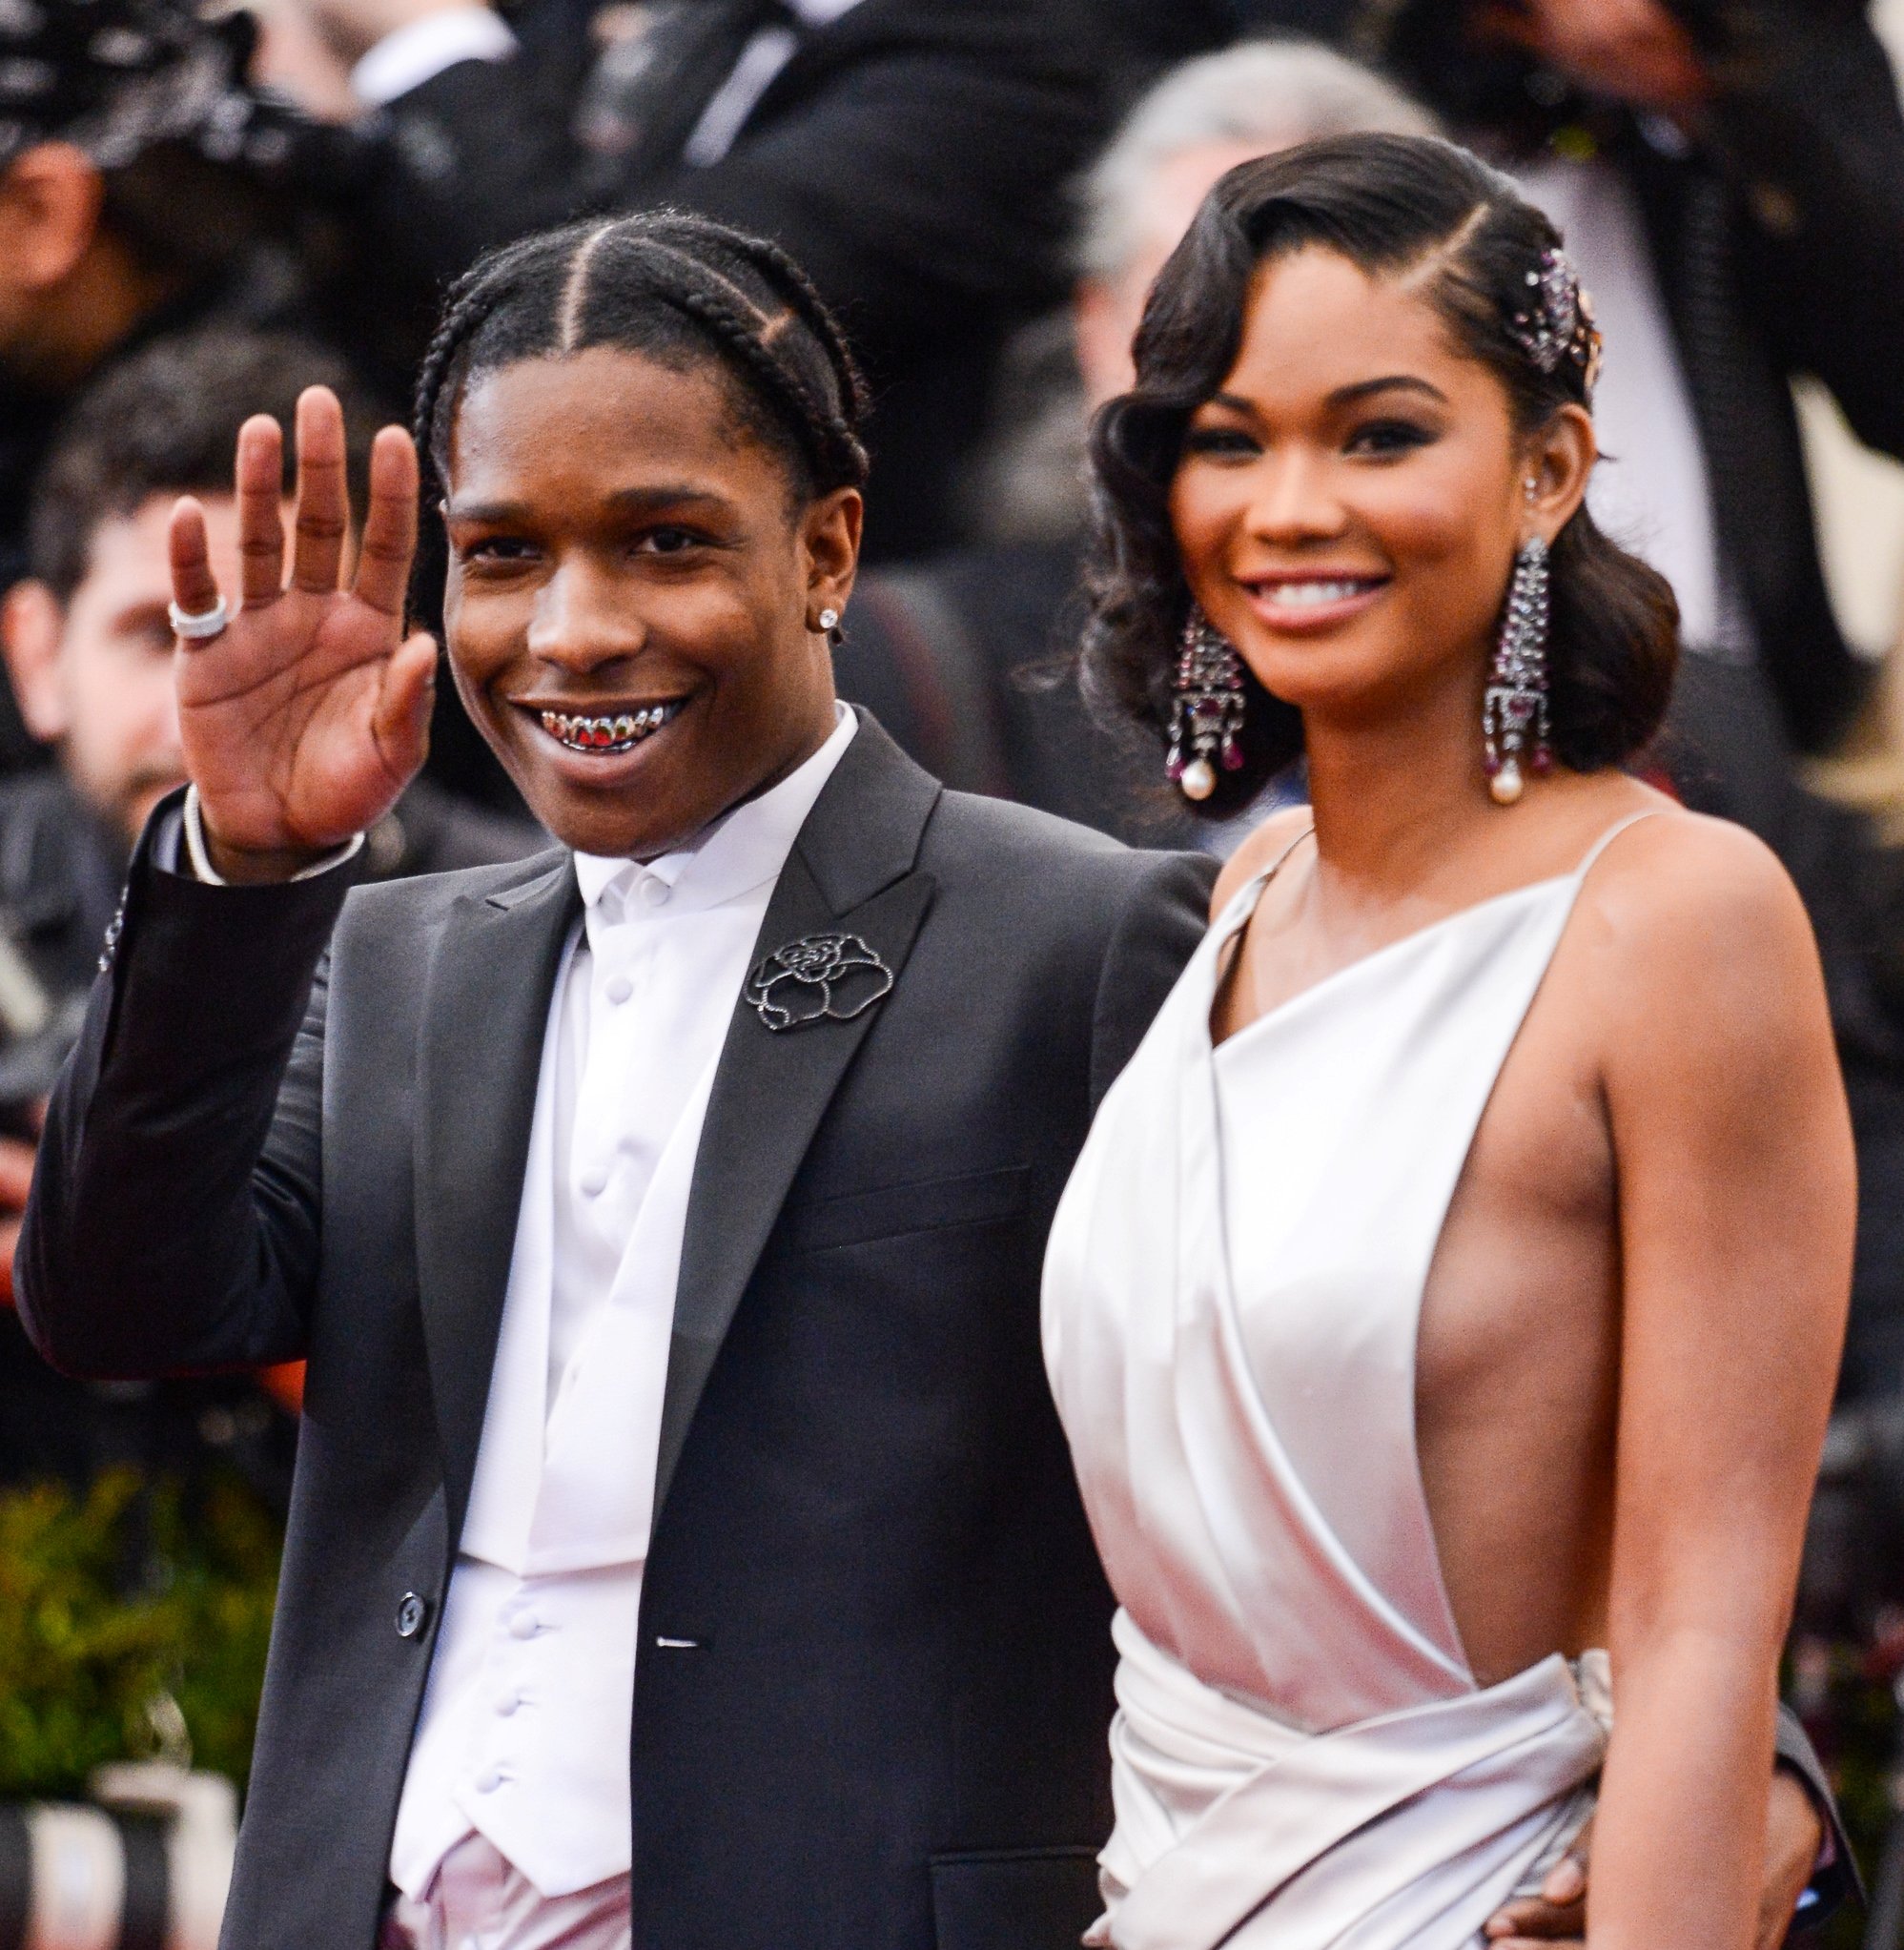 A$AP Rocky and Chanel Iman entering the Charles James Beyond Fashion Costume Institute Gala